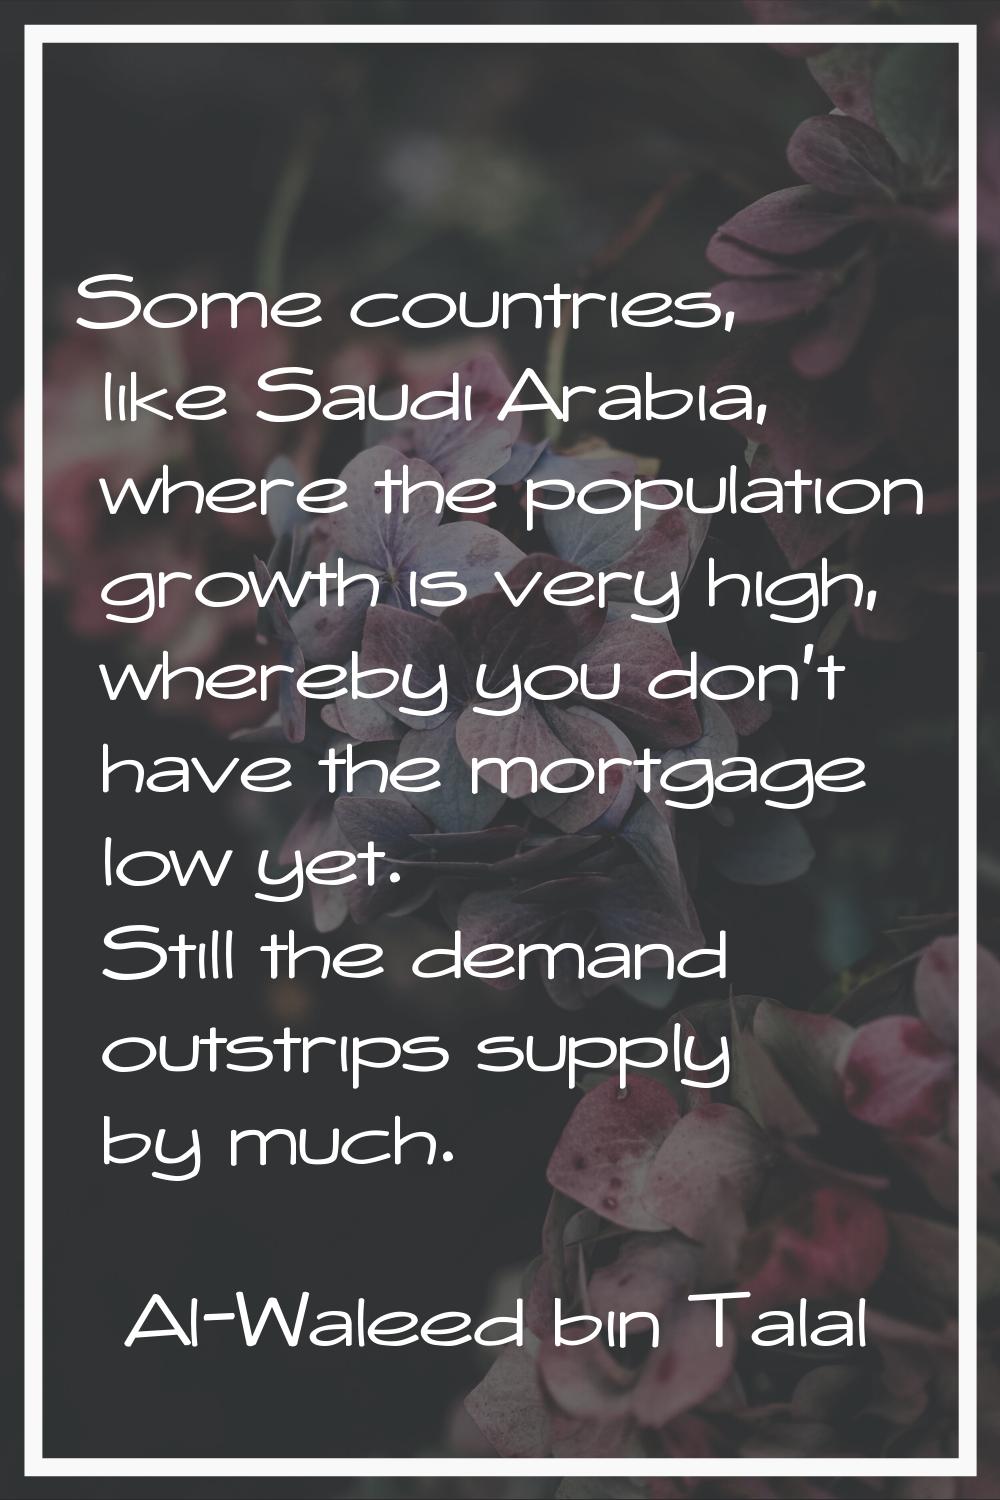 Some countries, like Saudi Arabia, where the population growth is very high, whereby you don't have